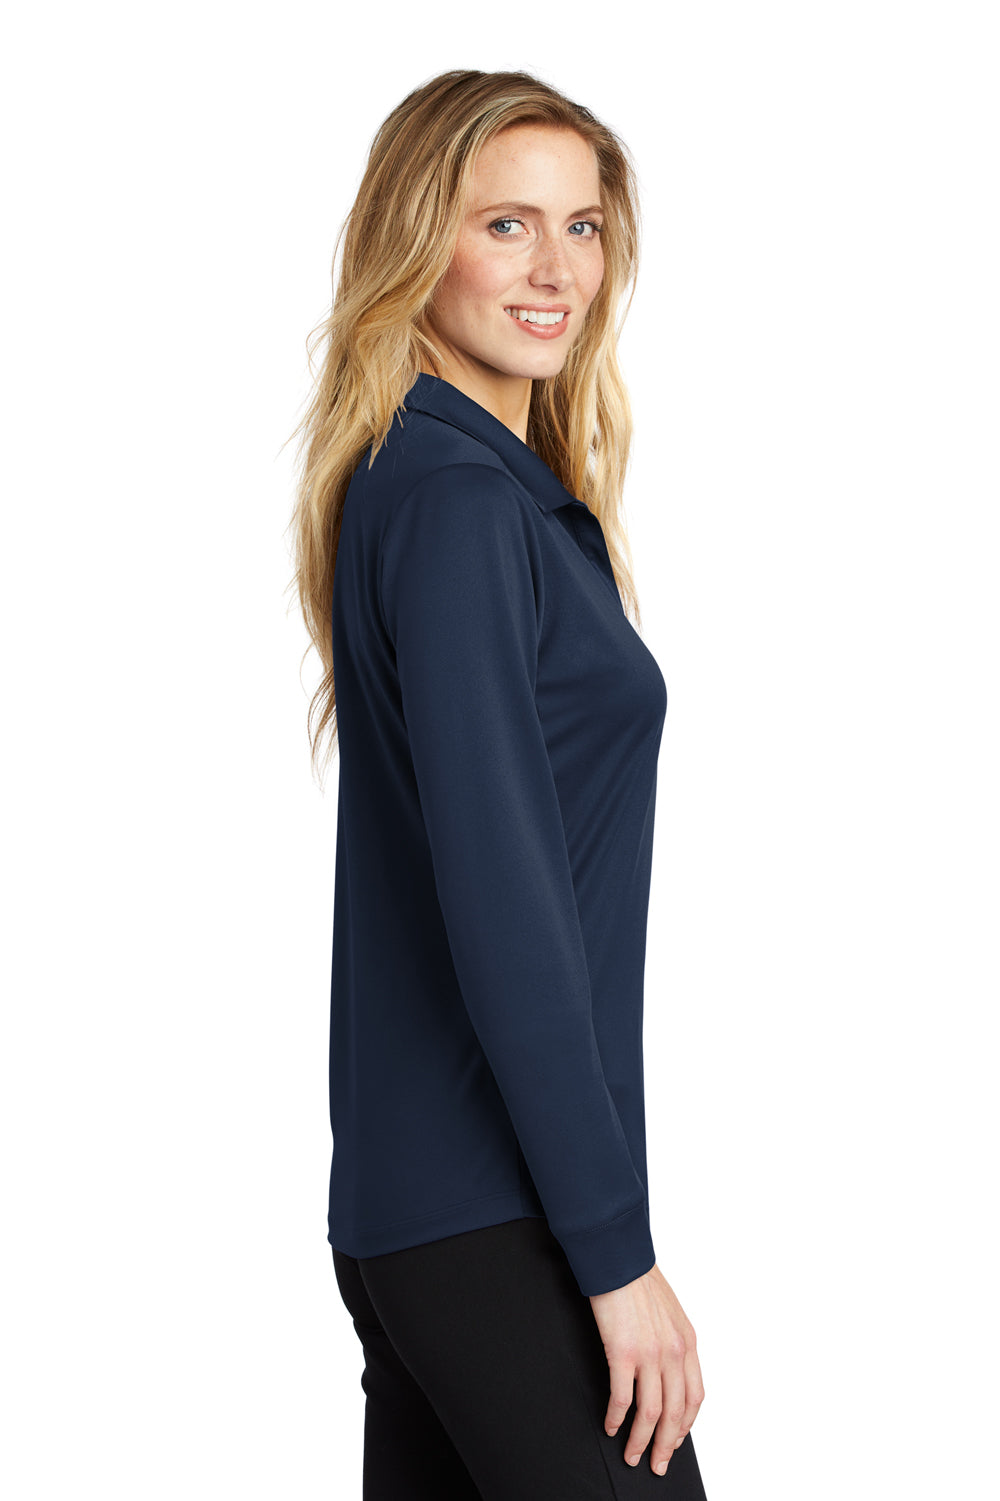 Port Authority Womens Silk Touch Performance Moisture Wicking Long Sleeve Polo Shirt Navy Blue Side